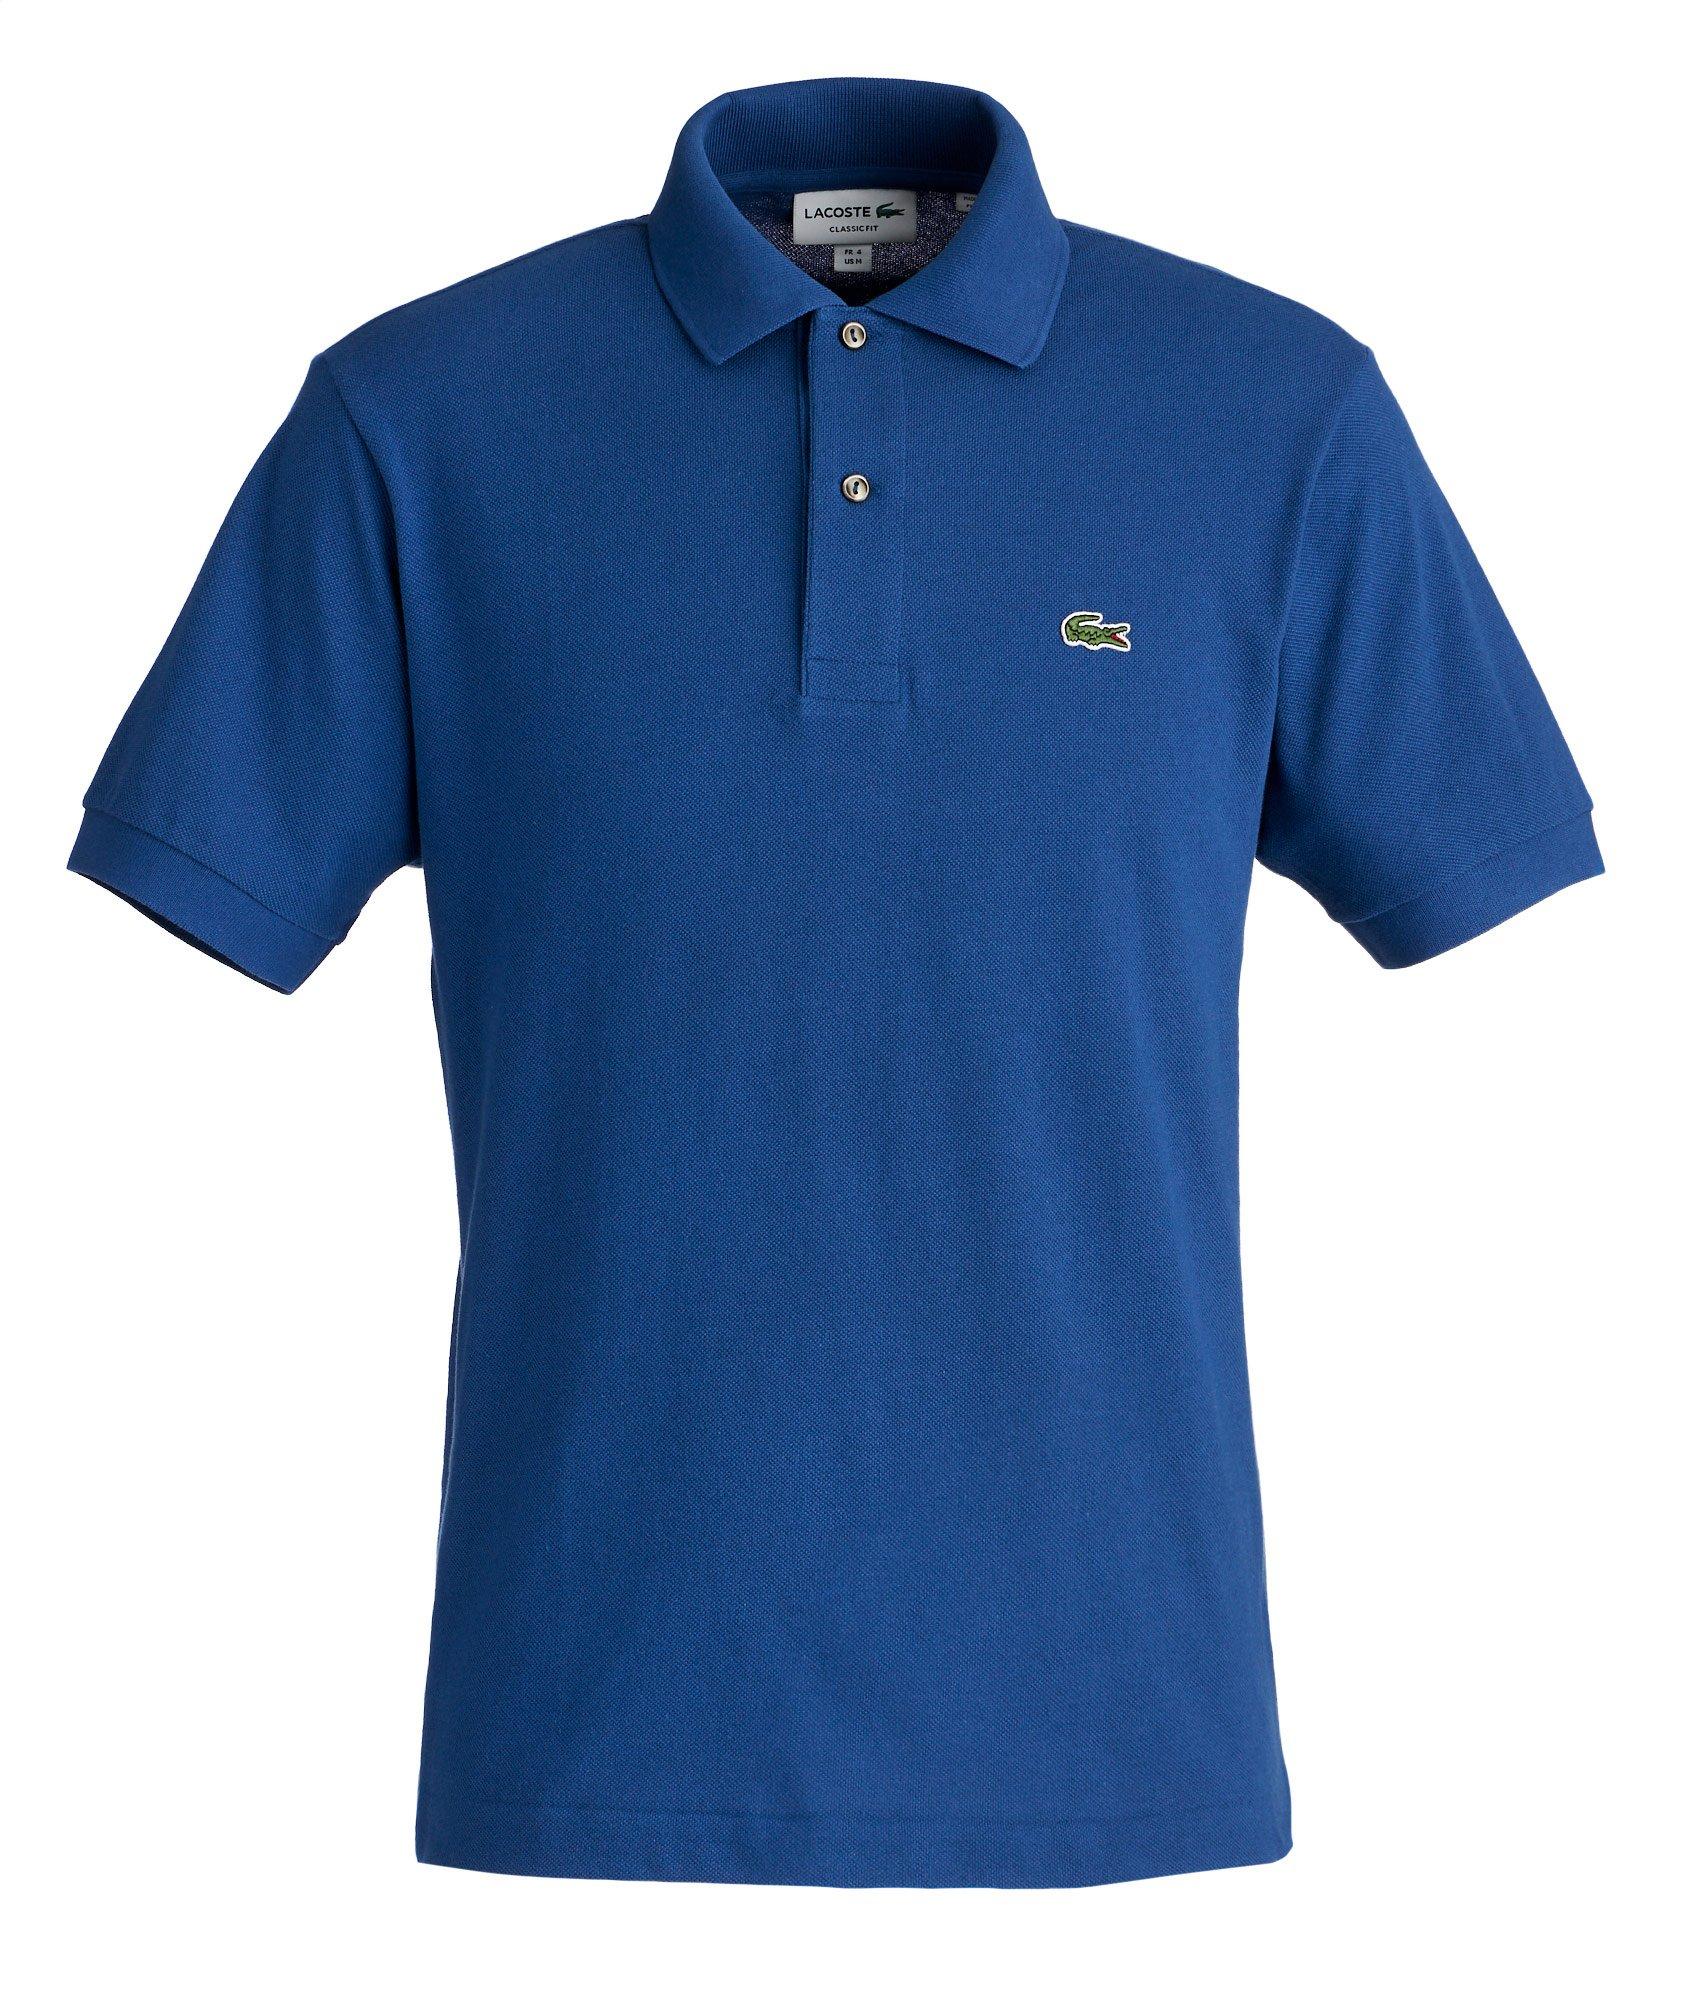 lacoste clothing canada, OFF 74%,Buy!